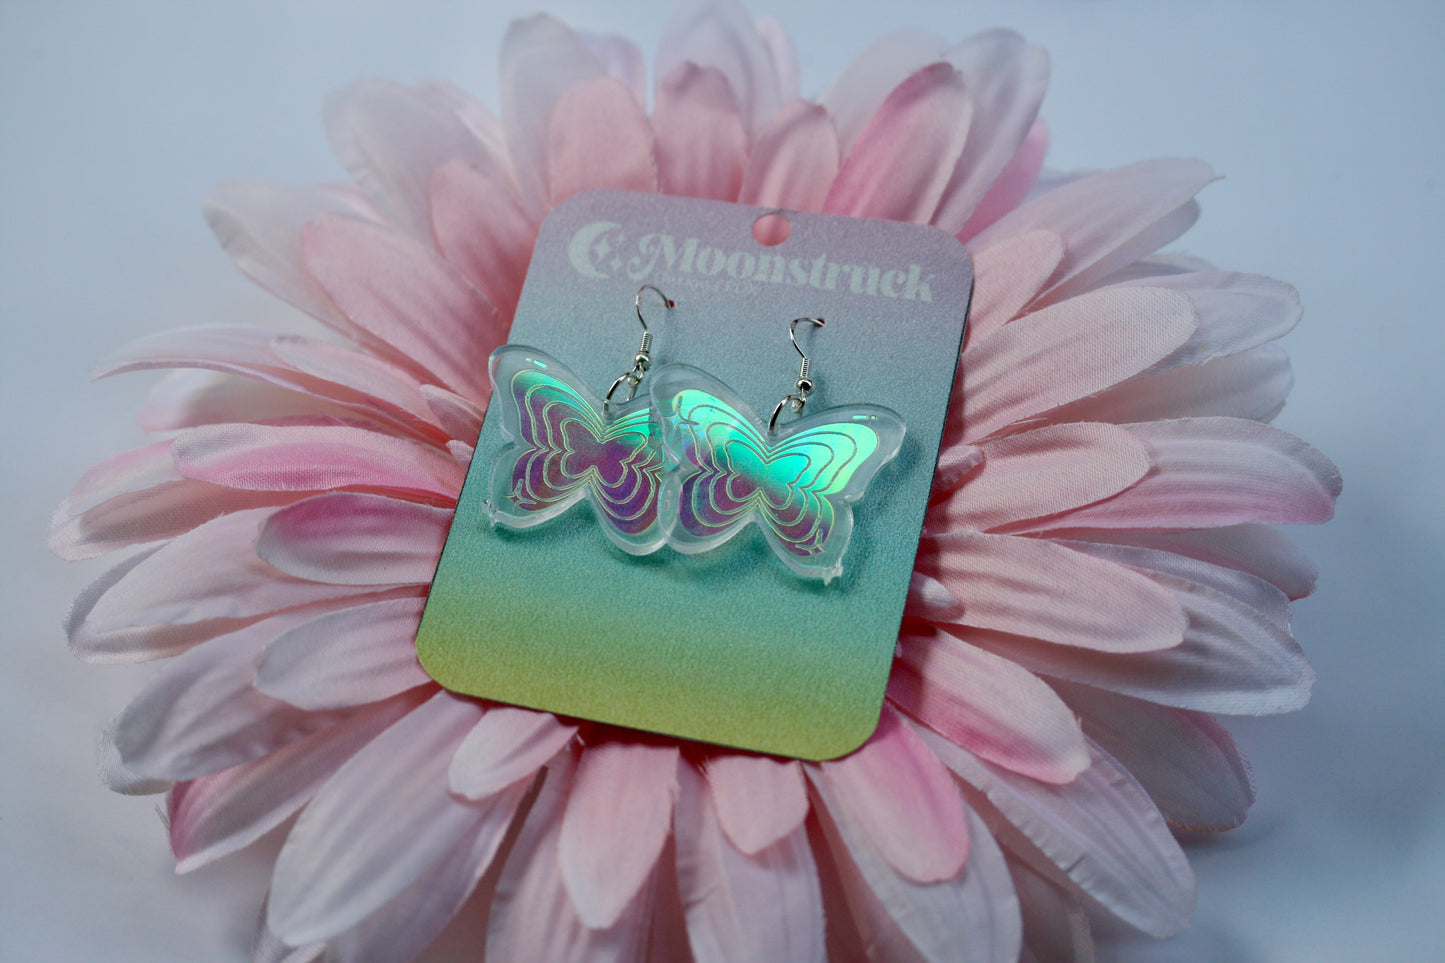 Y2K Butterfly Earrings - Iridescent Reflective Early 2000s Rainbow Kawaii Star Cute Fantasy Flowers Psychedelic